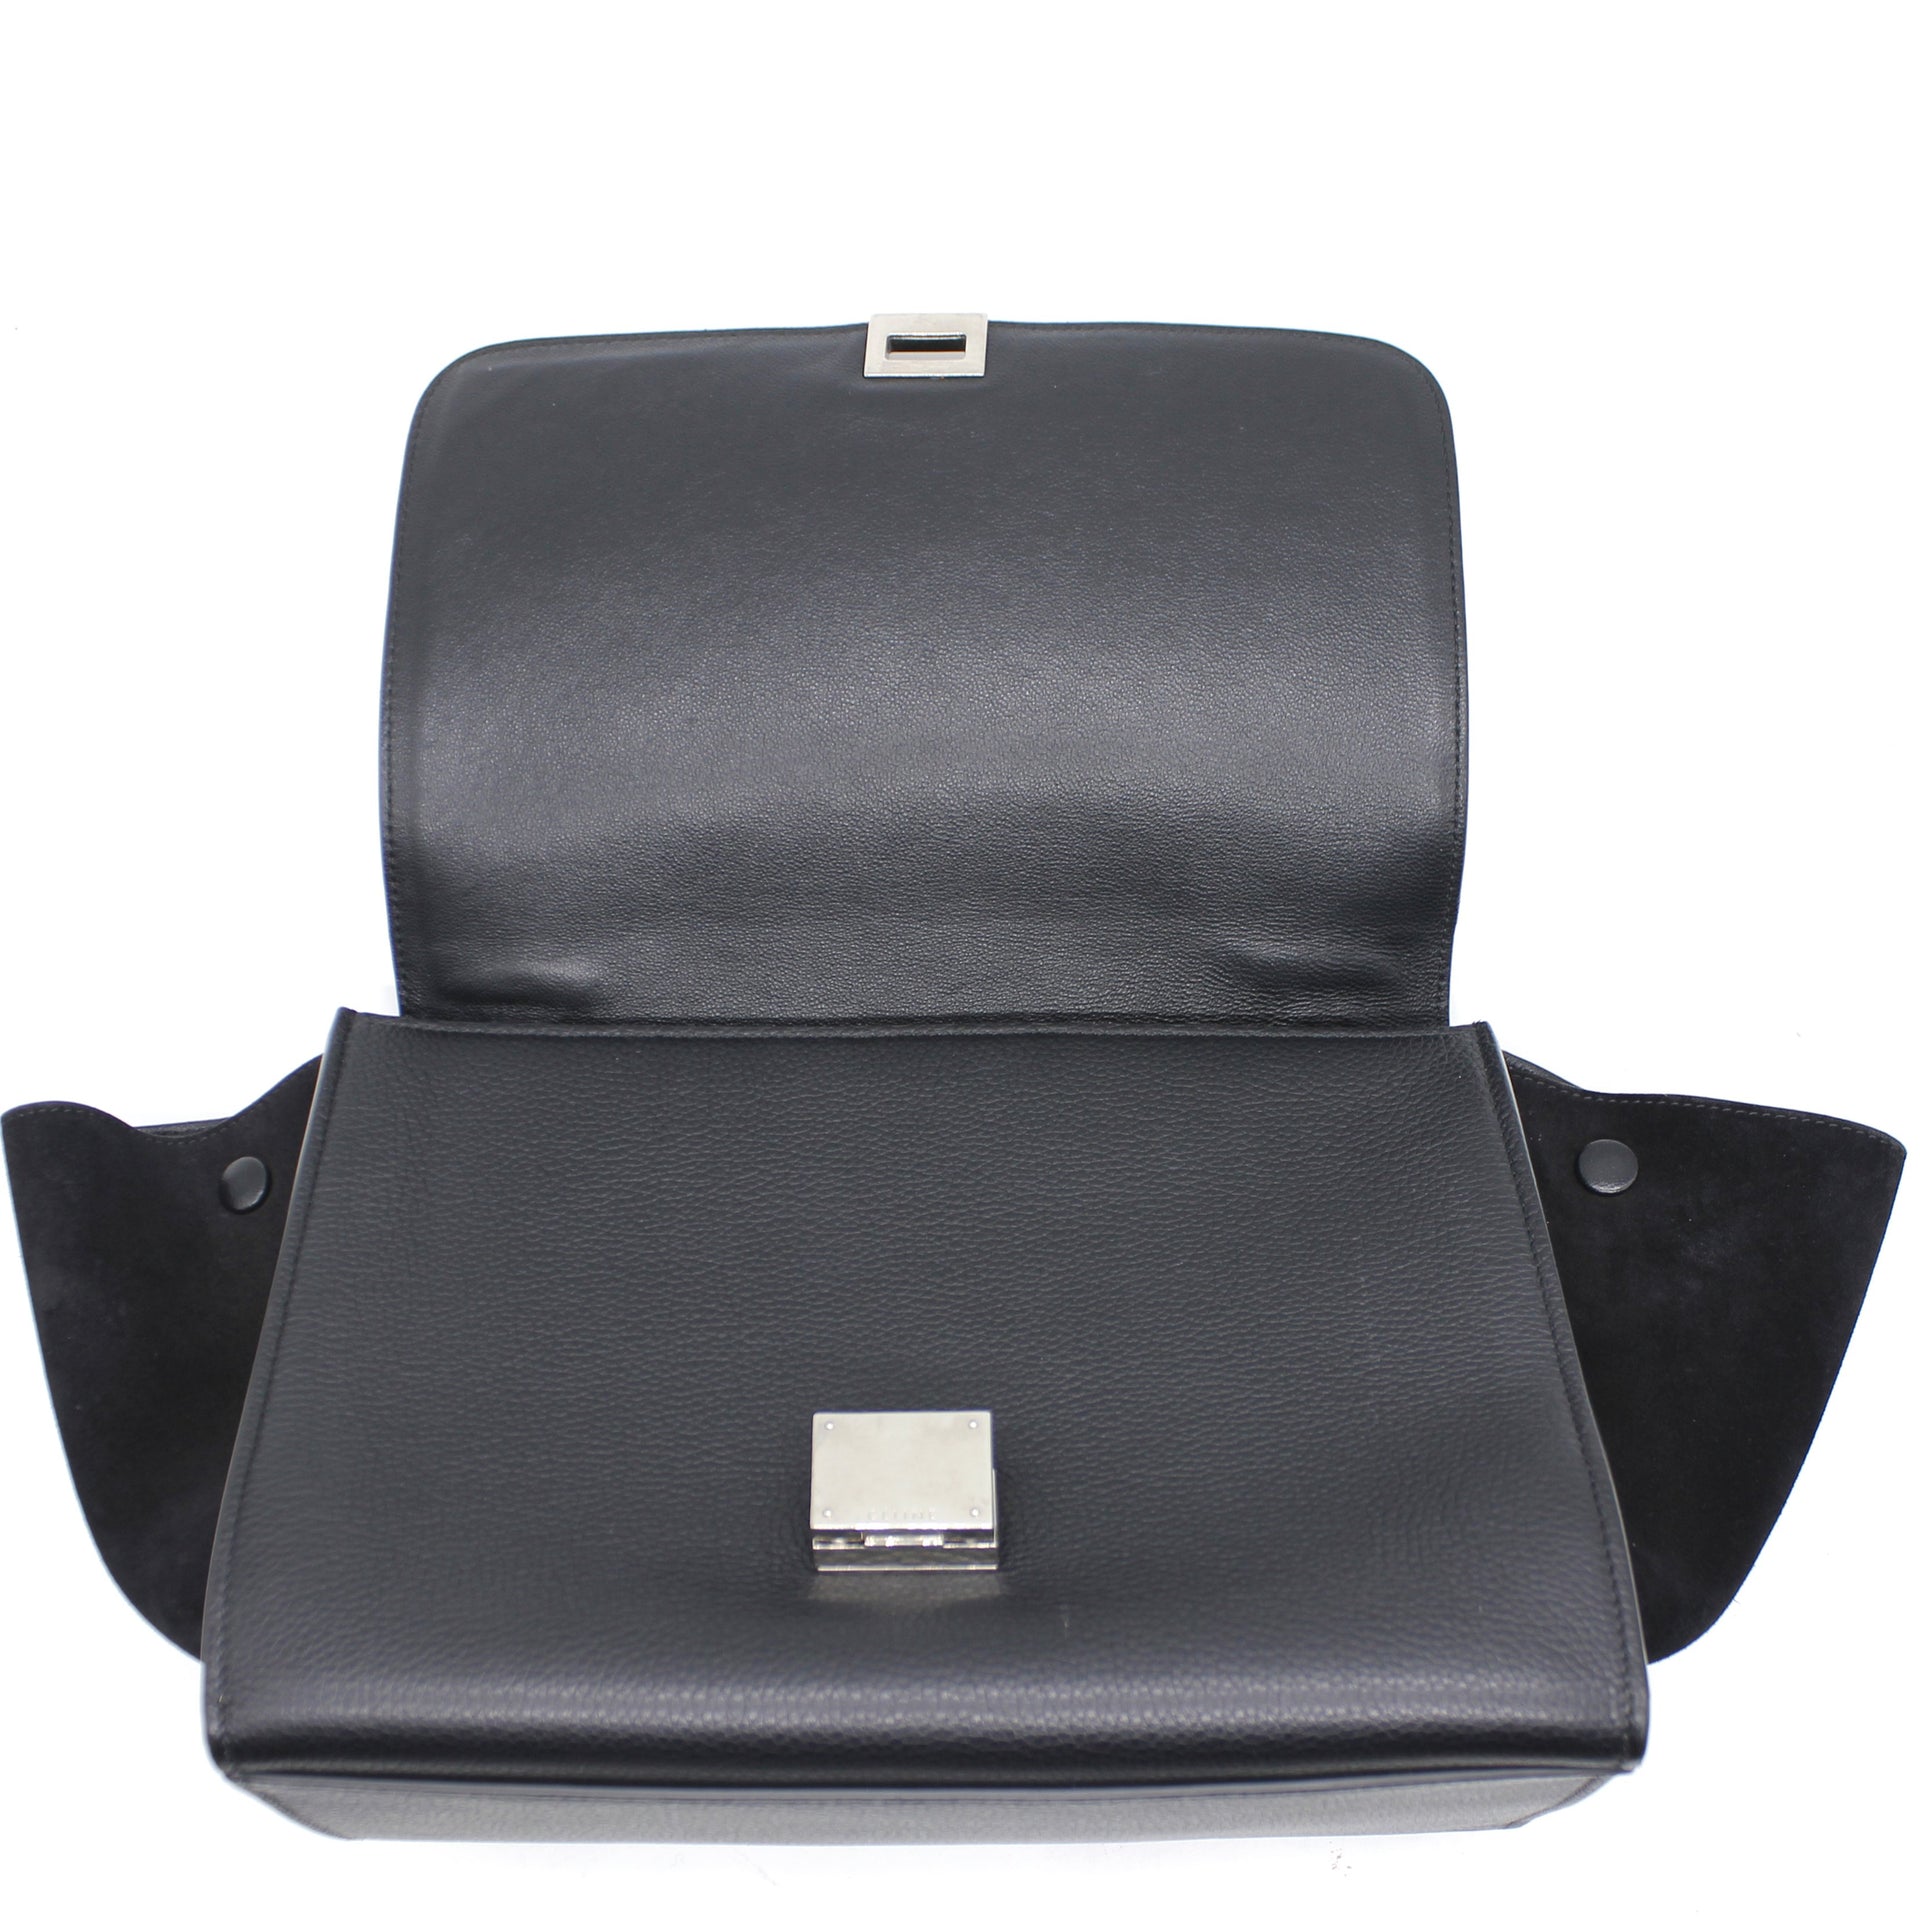 Textured Calfskin and Suede Medium Trapeze Luggage Black